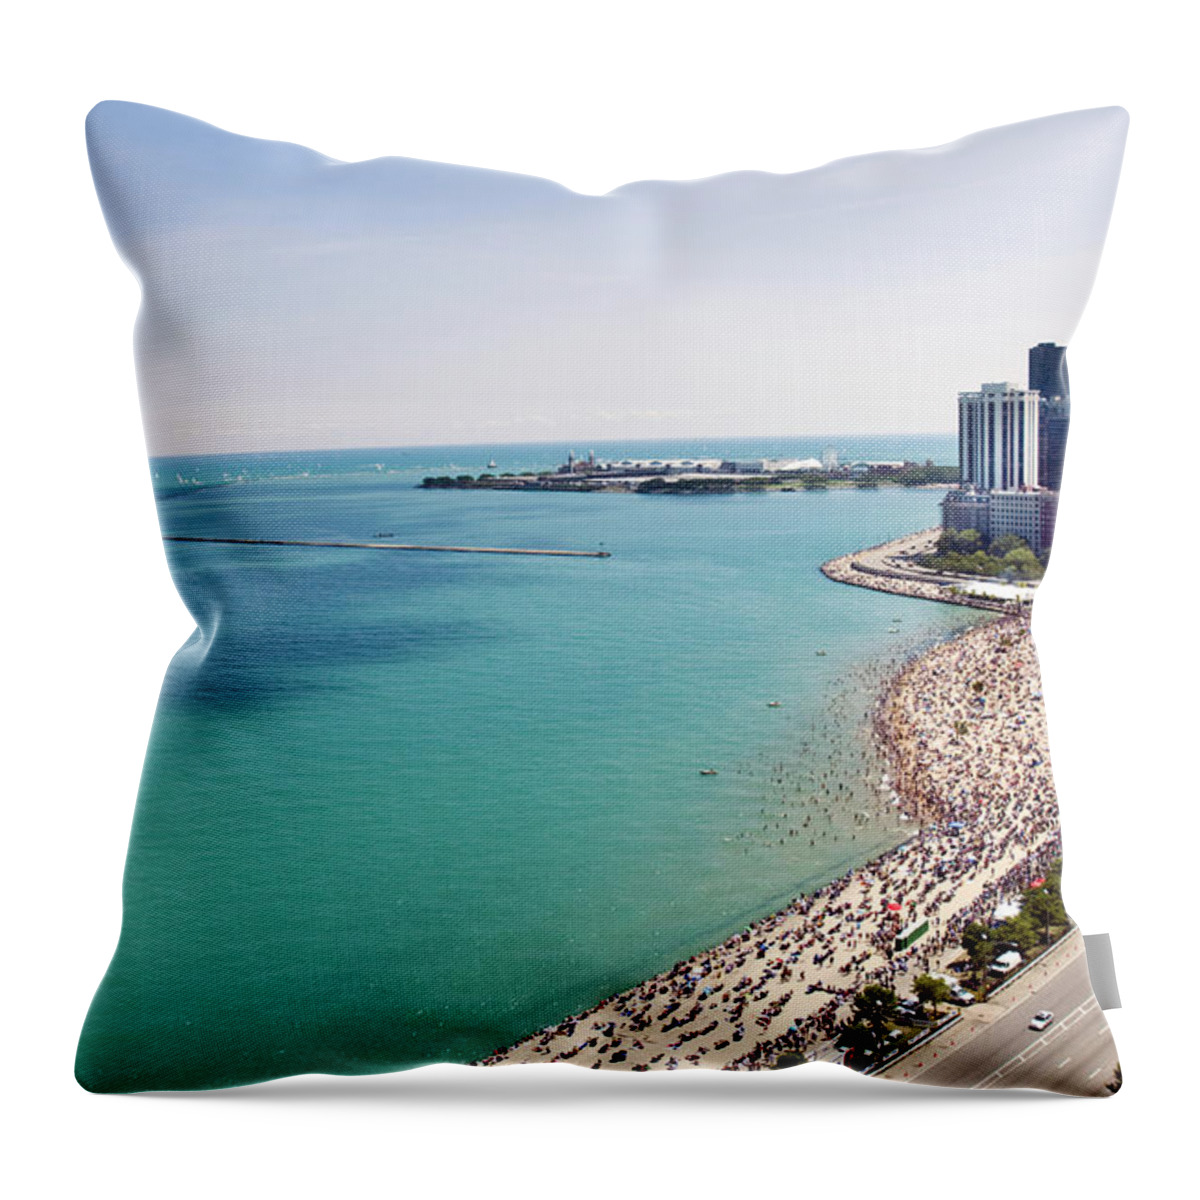 Outdoors Throw Pillow featuring the photograph Summer In An Urban Beach by By Ken Ilio